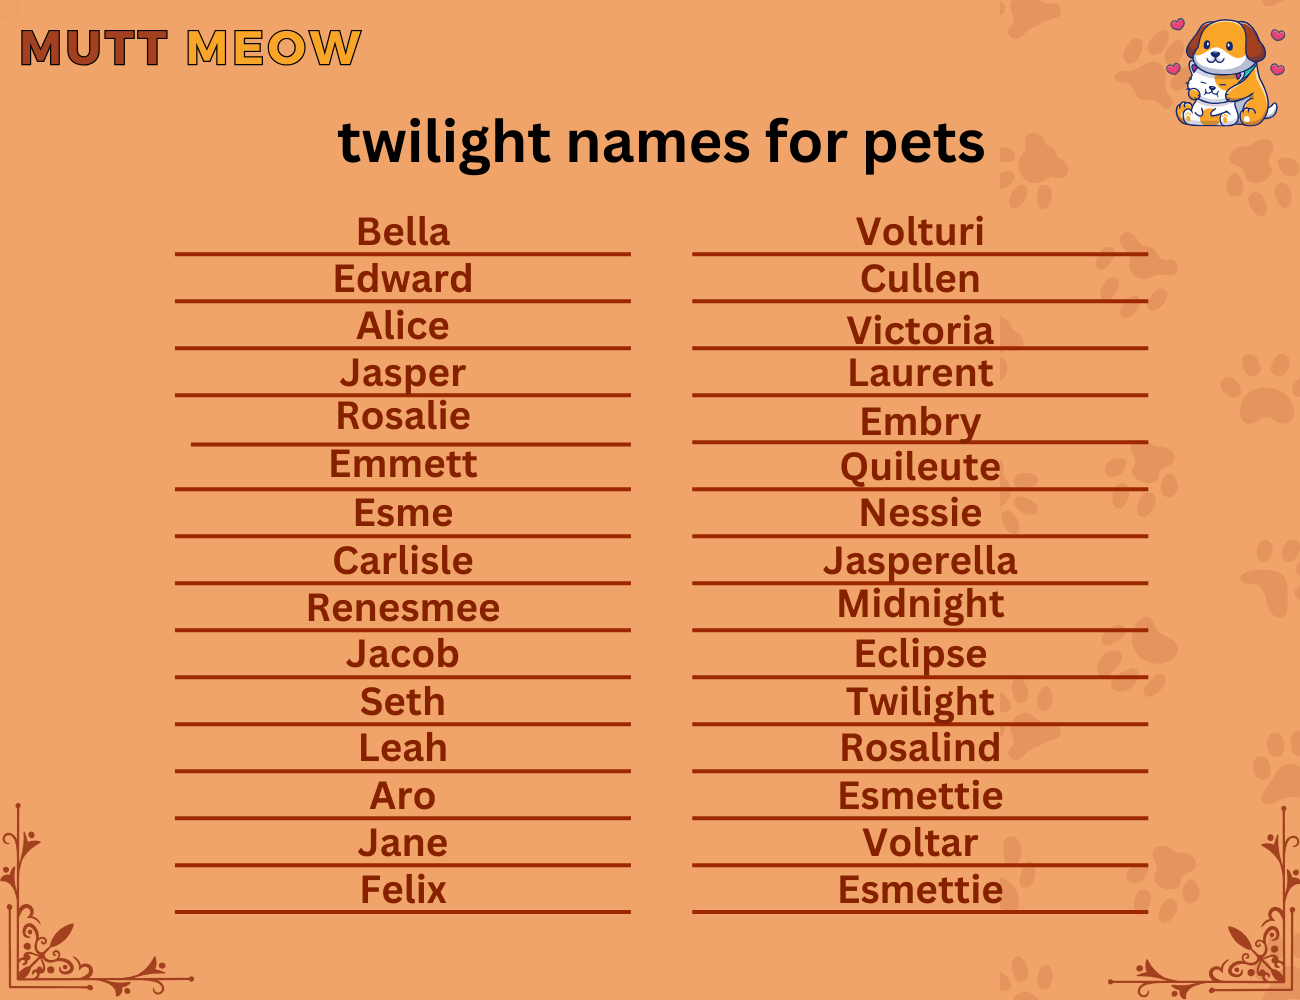 twilight names for pets